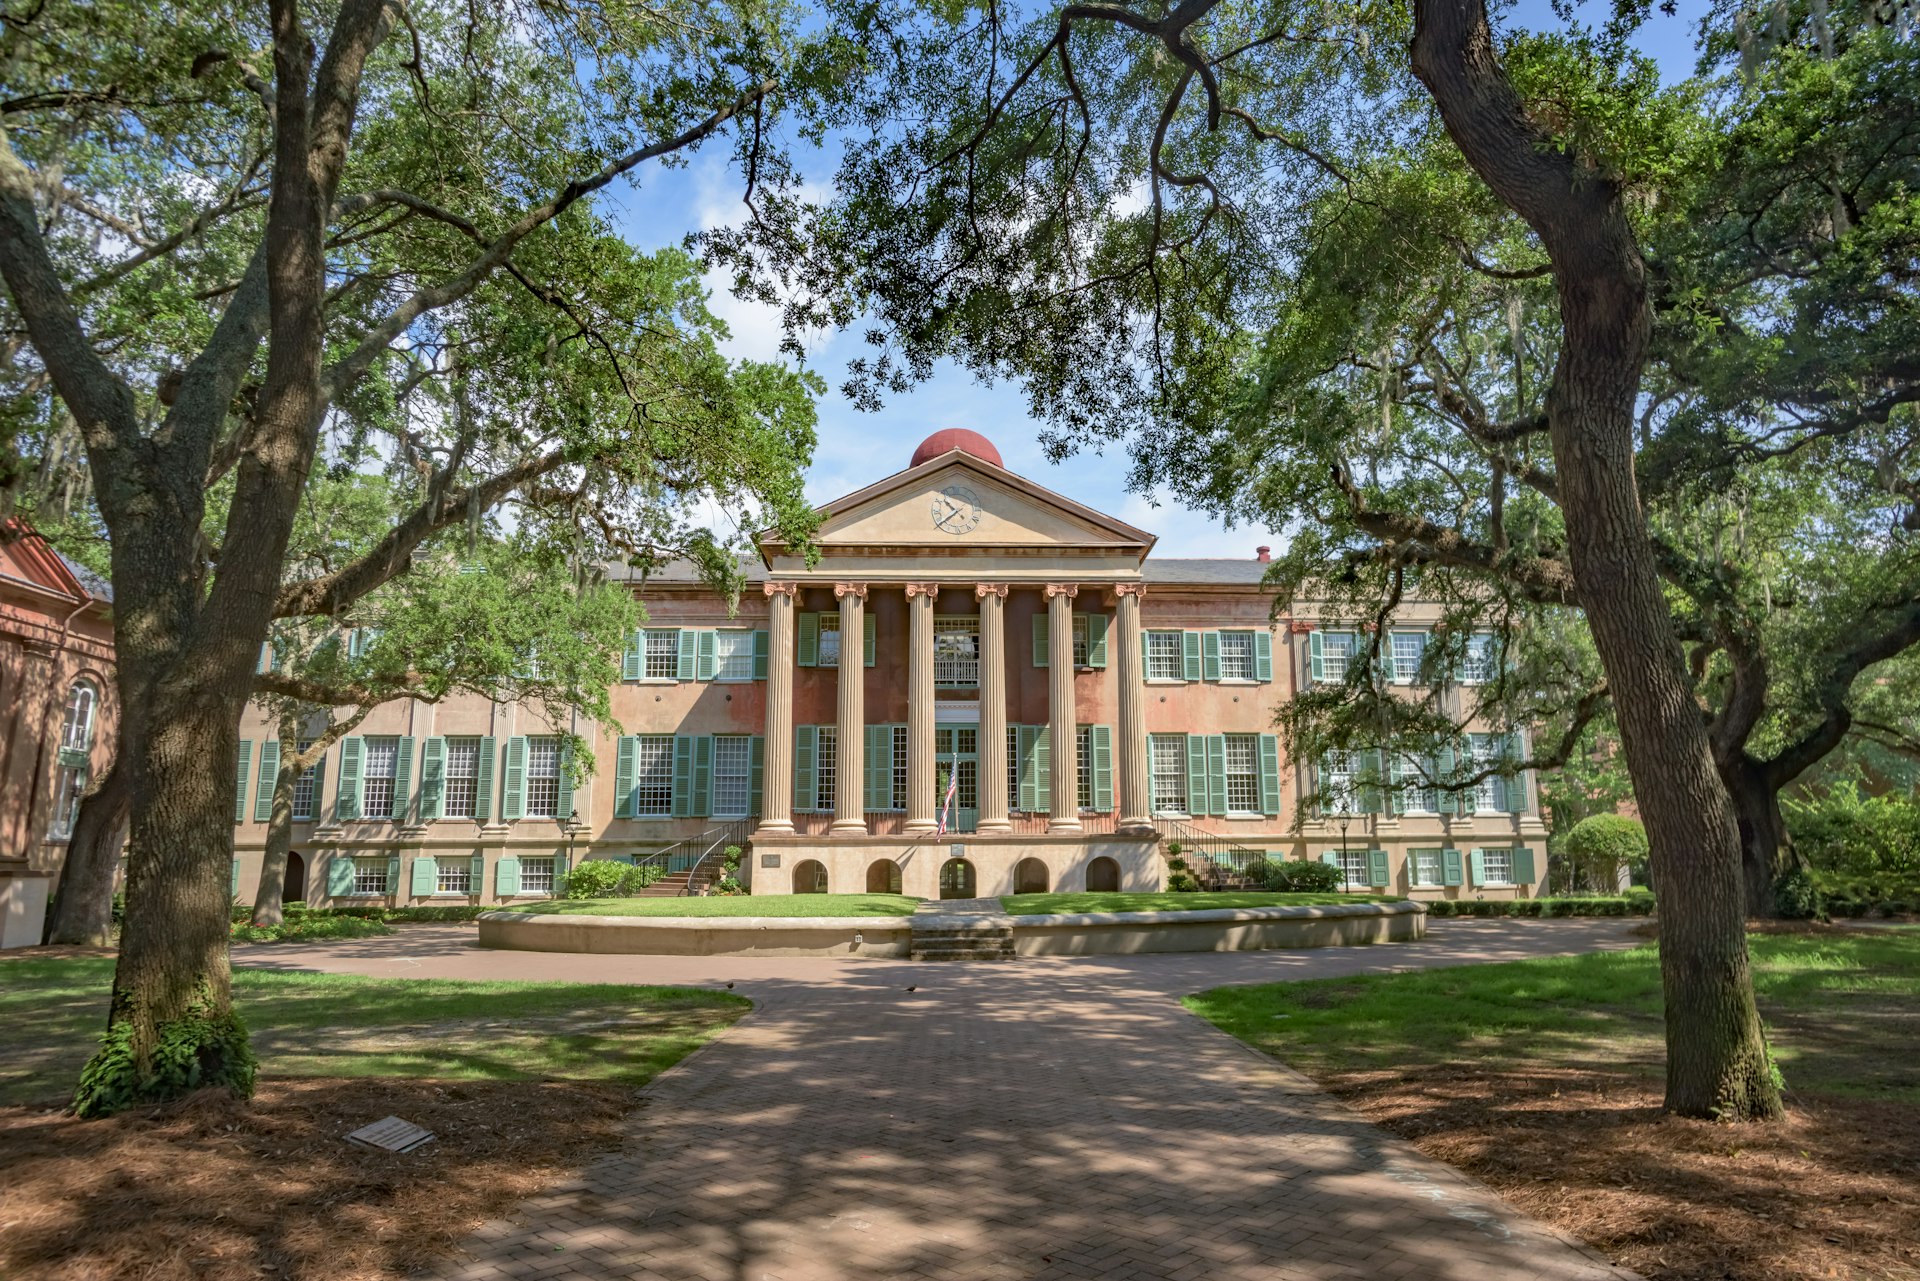 Randolph Hall, the main academic building on the College of Charleston campus, sits behind the shade of trees on the lawn.